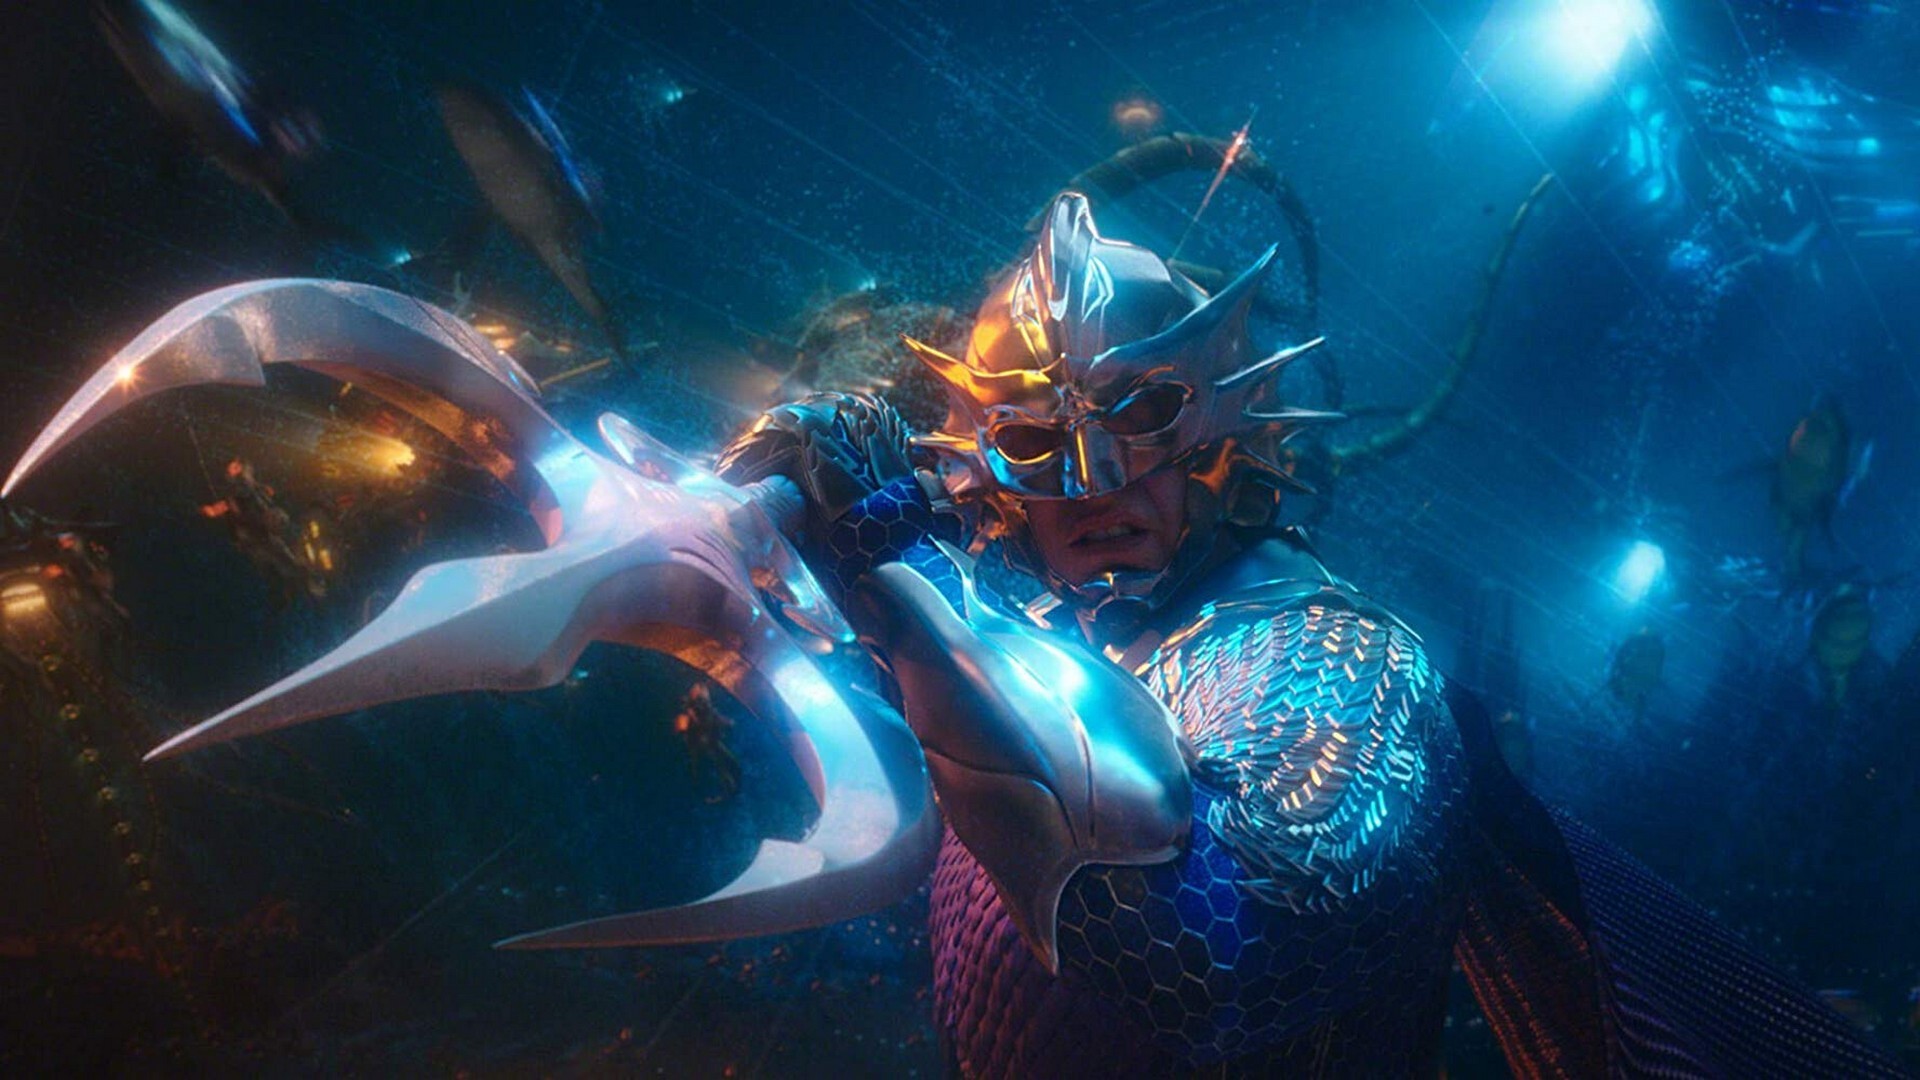 1920x1080 Aquaman 2018 Full Movie Wallpaper with resolution  pixel. You can  make this wallpaper for